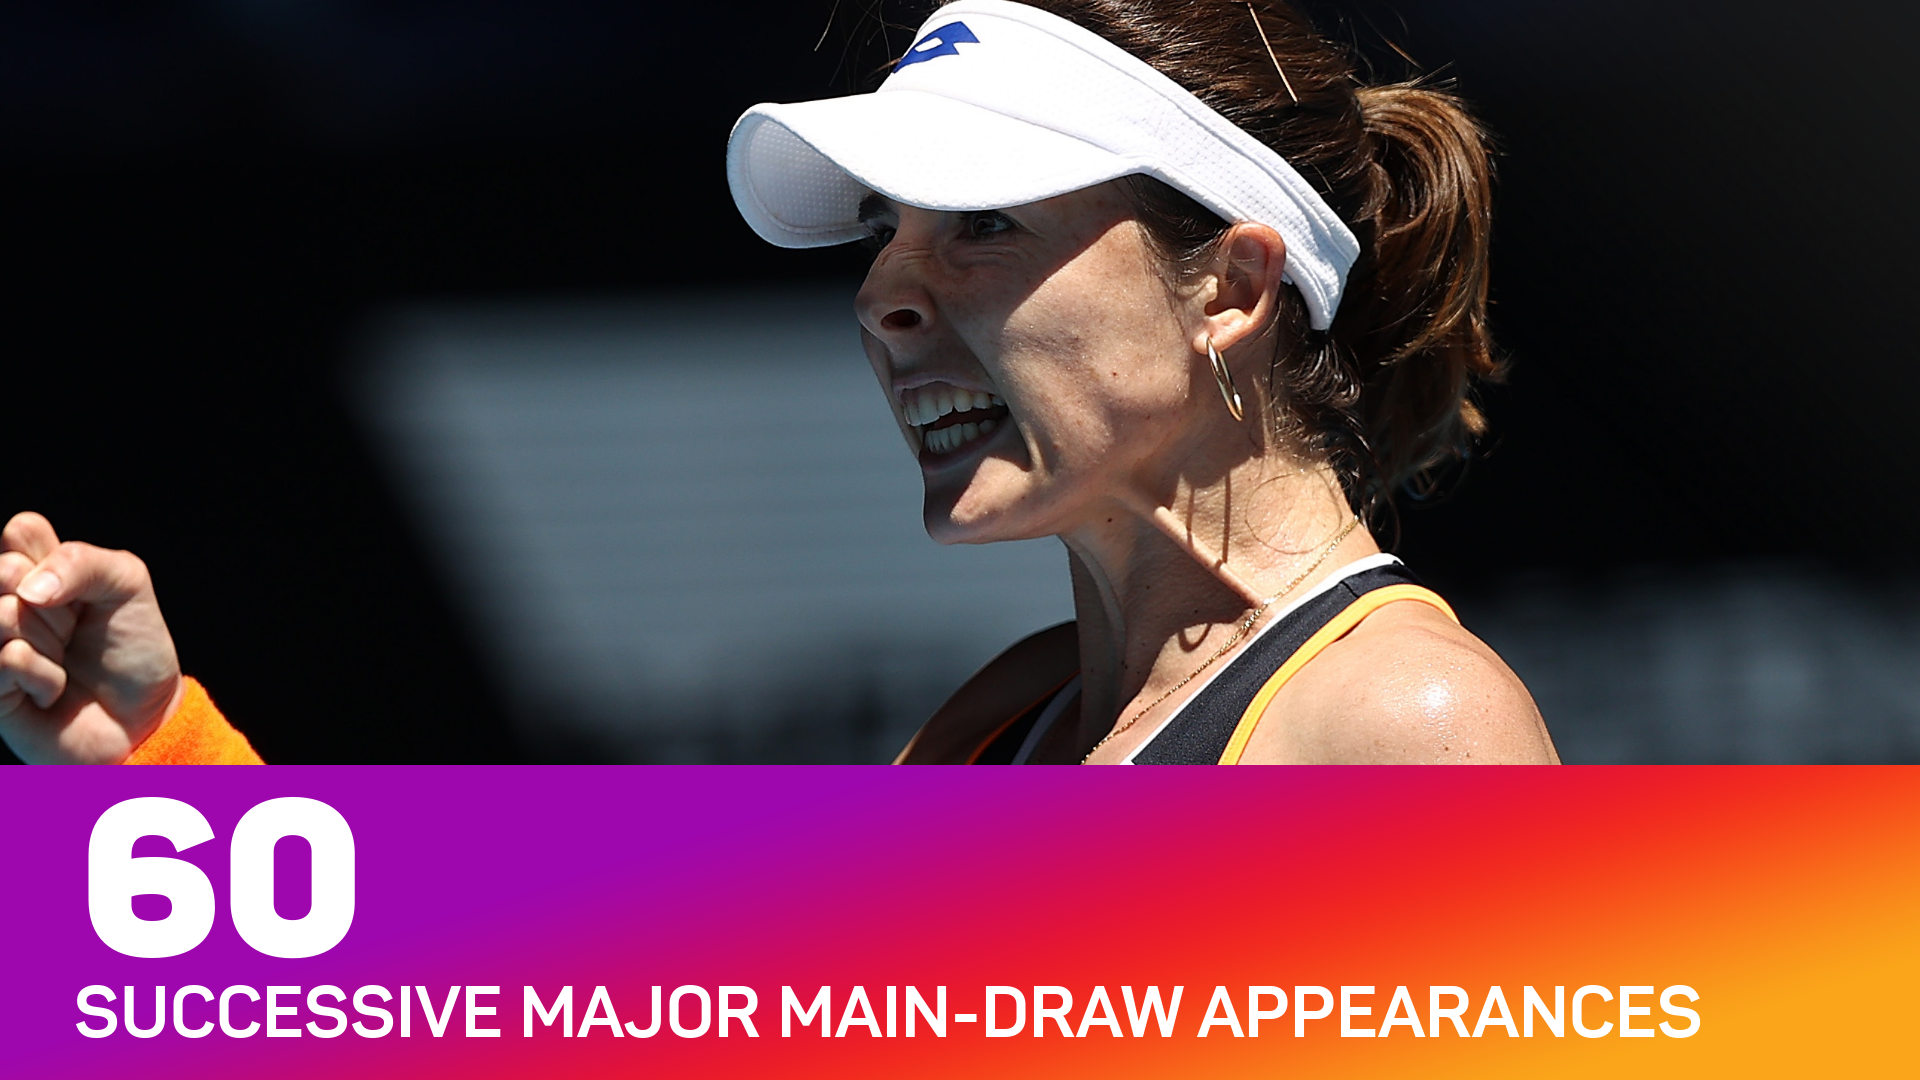 Alize Cornet is hunting a grand slam record